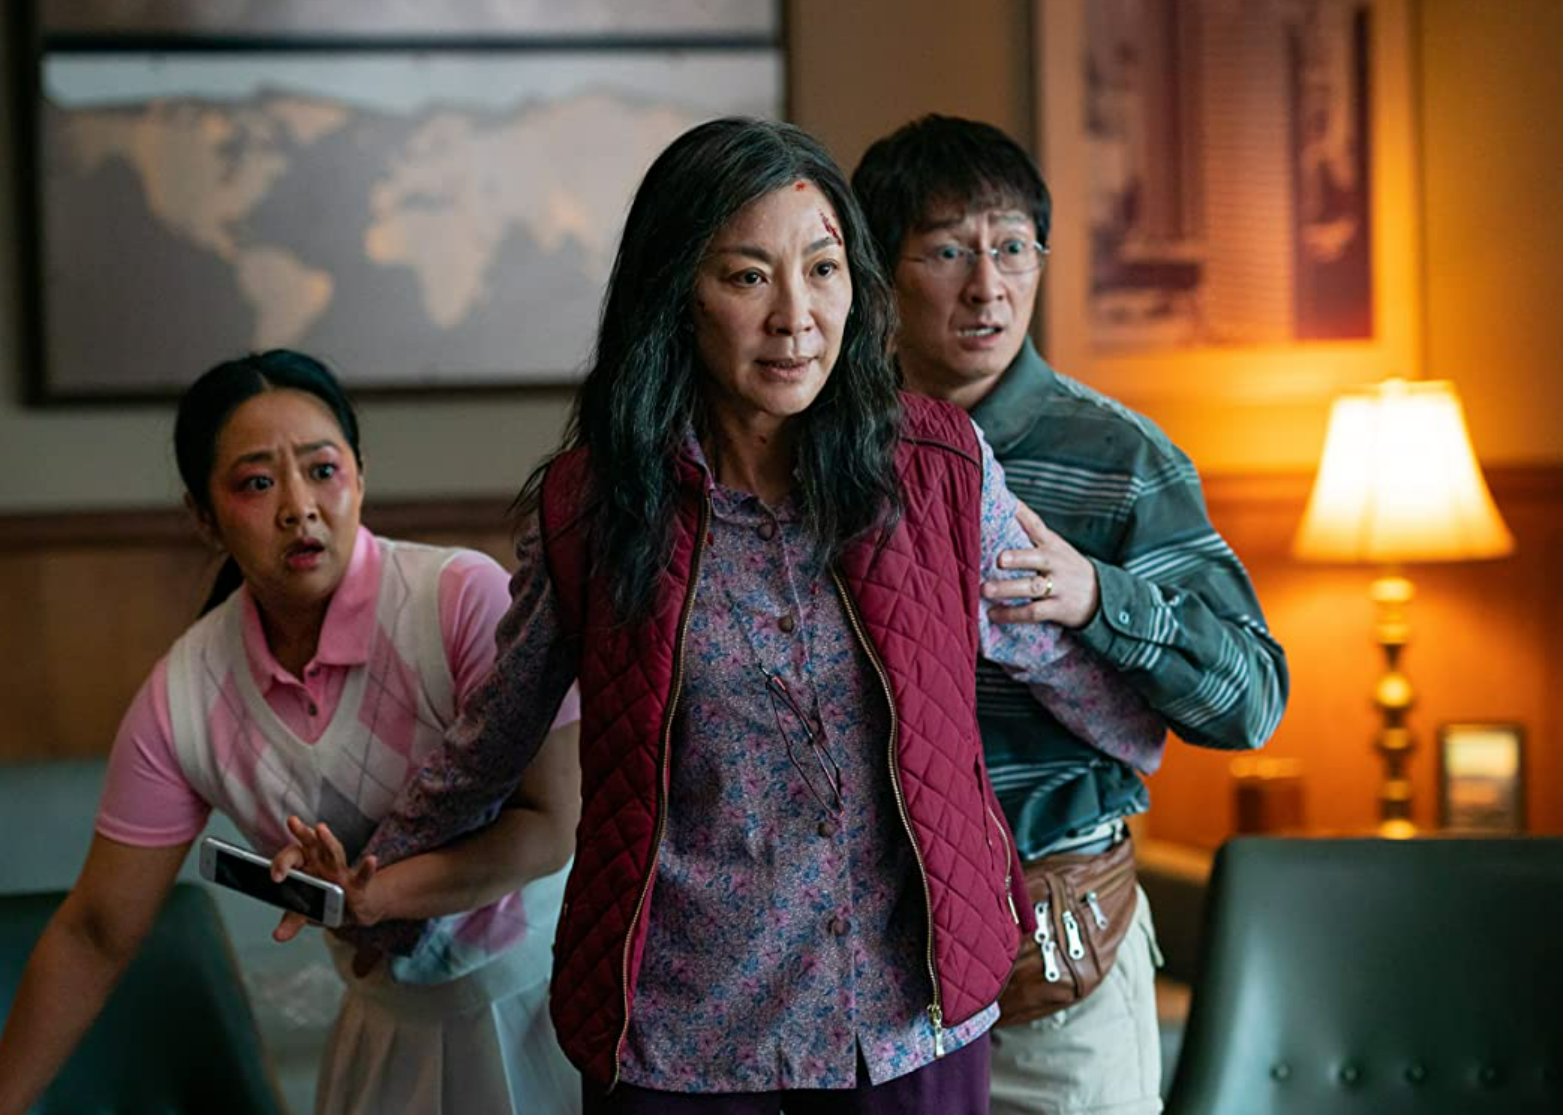 Michelle Yeoh, Ke Huy Quan, and Stephanie Hsu in a scene from "Everything Everywhere All at Once".